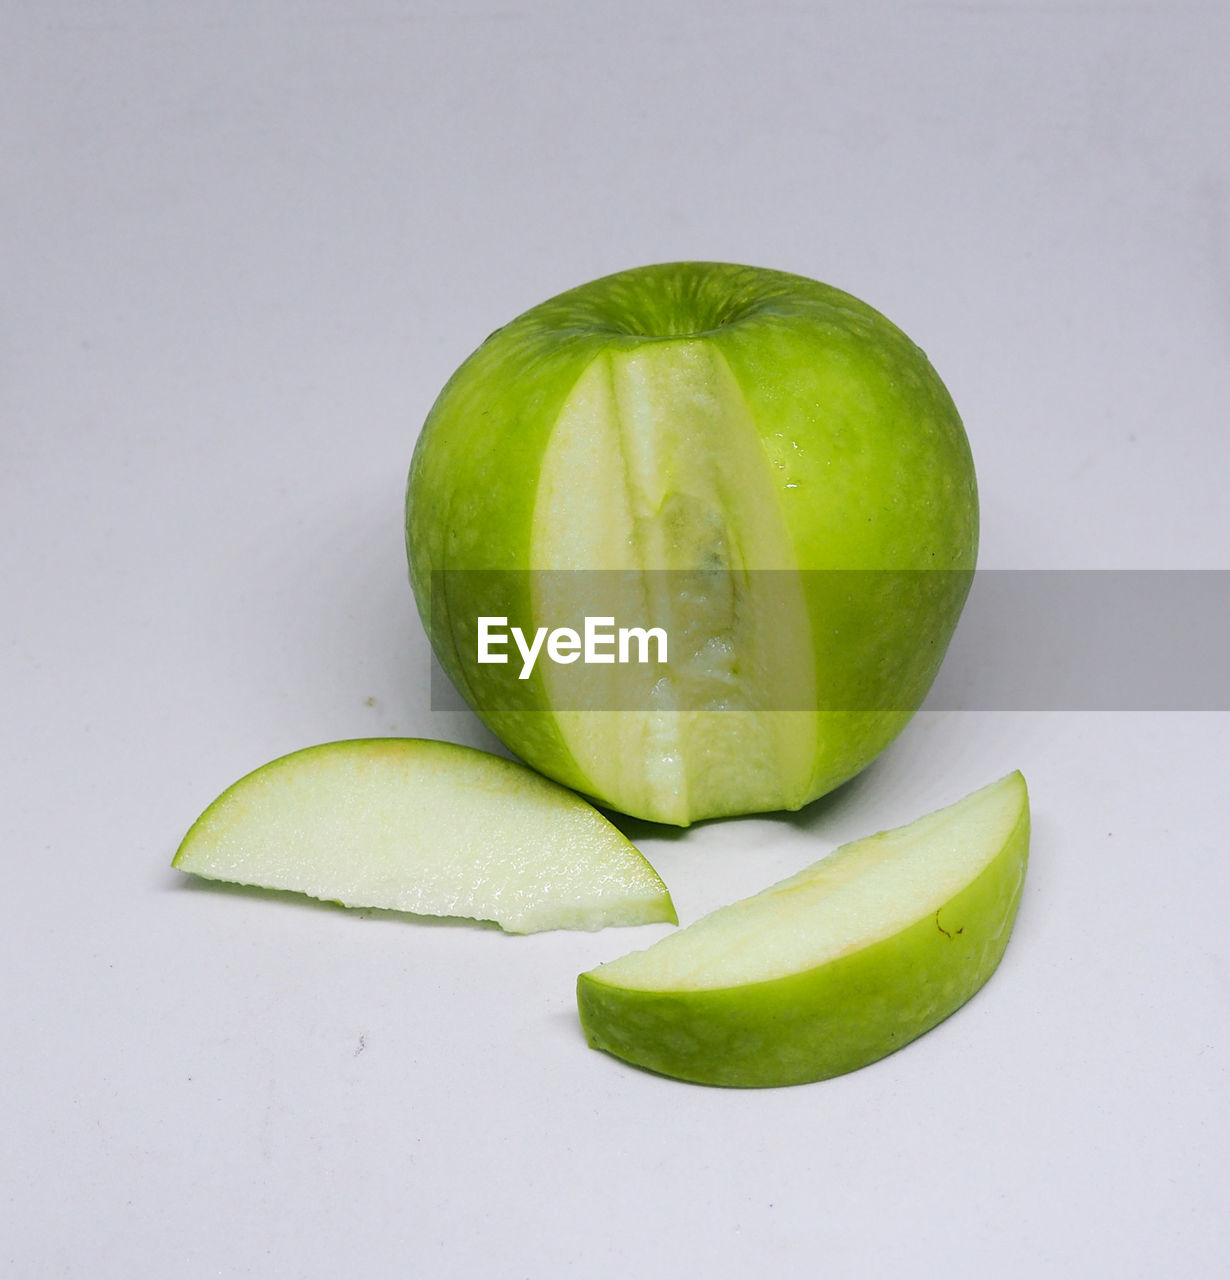 HIGH ANGLE VIEW OF GREEN FRUIT AGAINST WHITE BACKGROUND